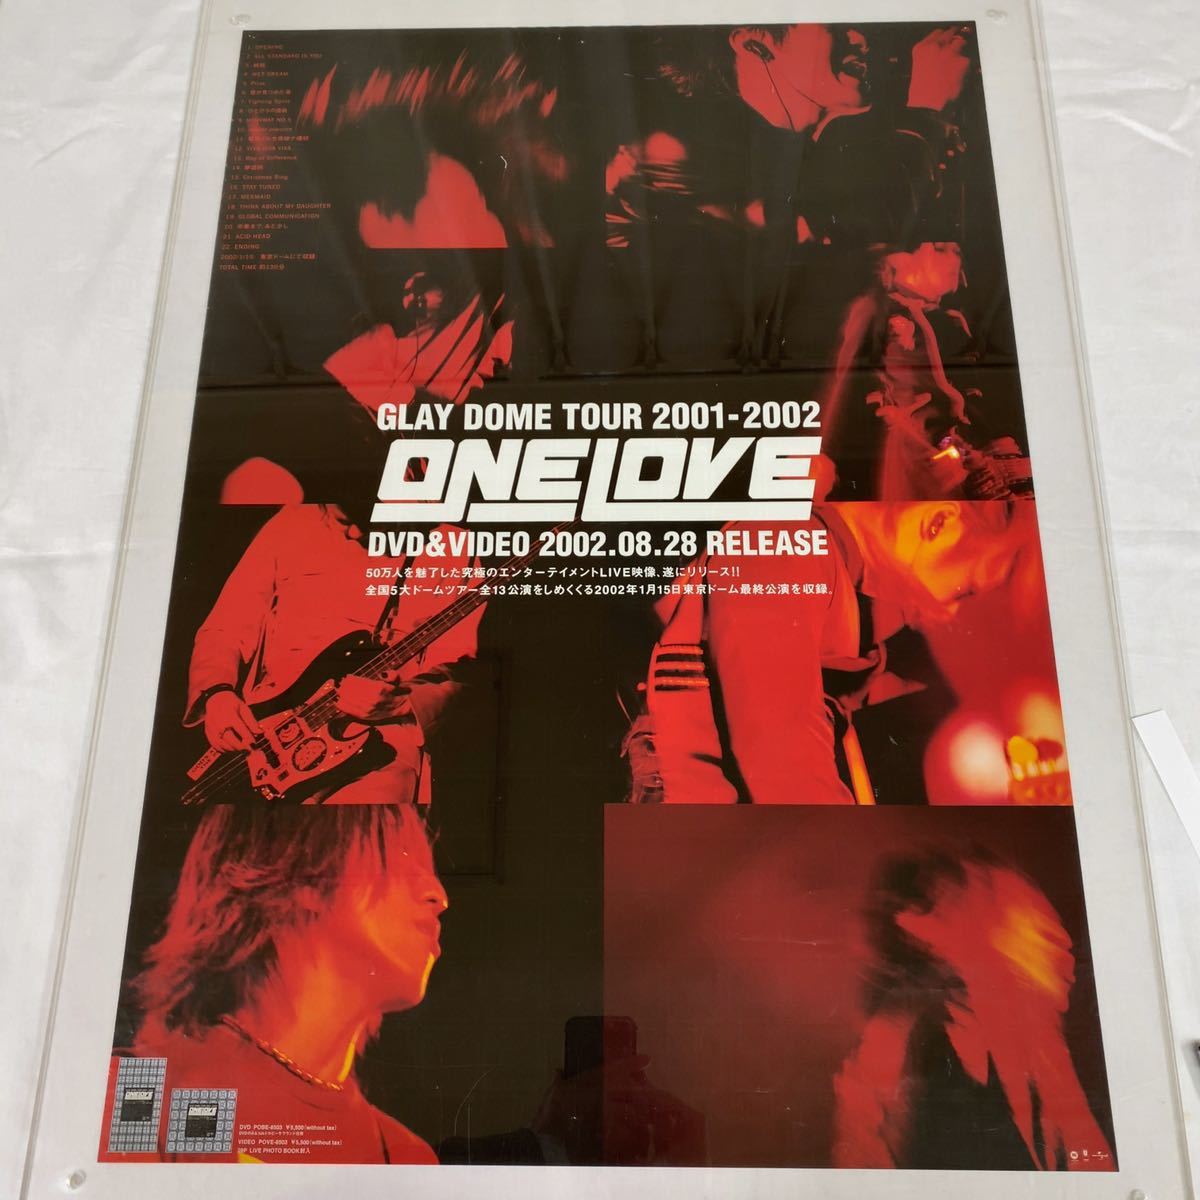 GLAY DOME TOUR 2001-2002 ONE LOVE ポスター 当時物 ライブ 告知 広告 ヴィンテージ_画像1